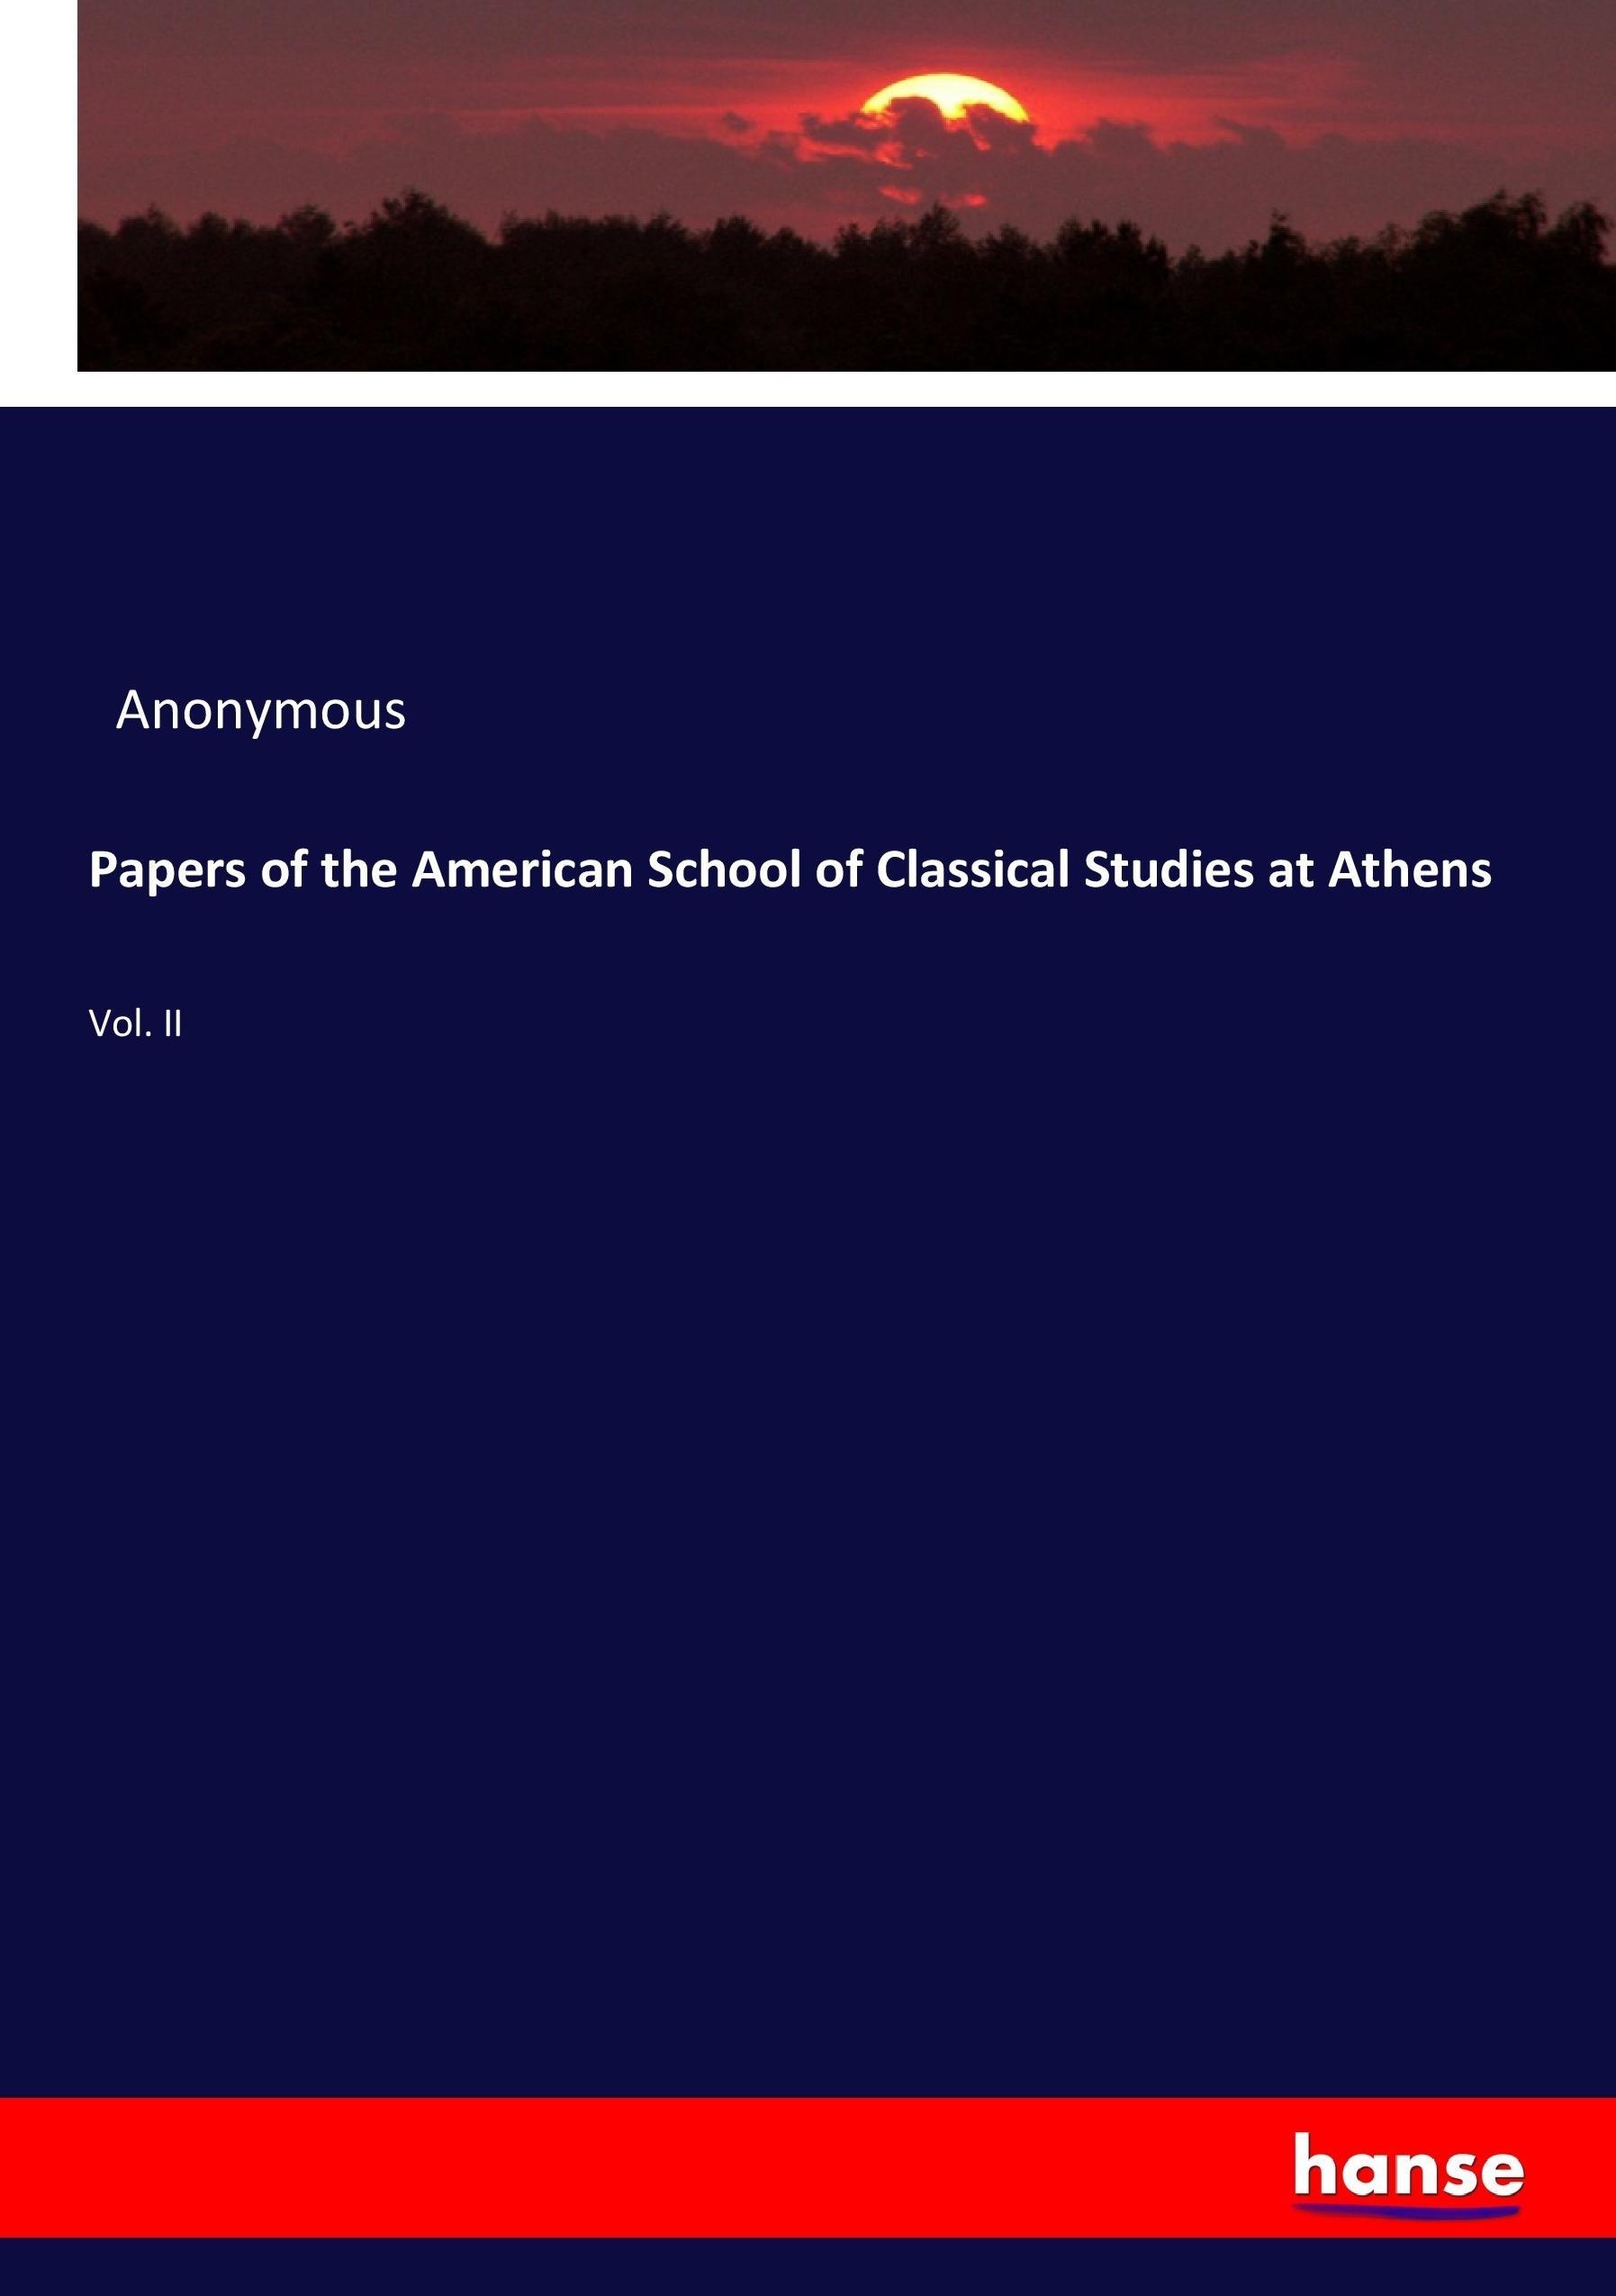 Papers of the American School of Classical Studies at Athens - Anonym